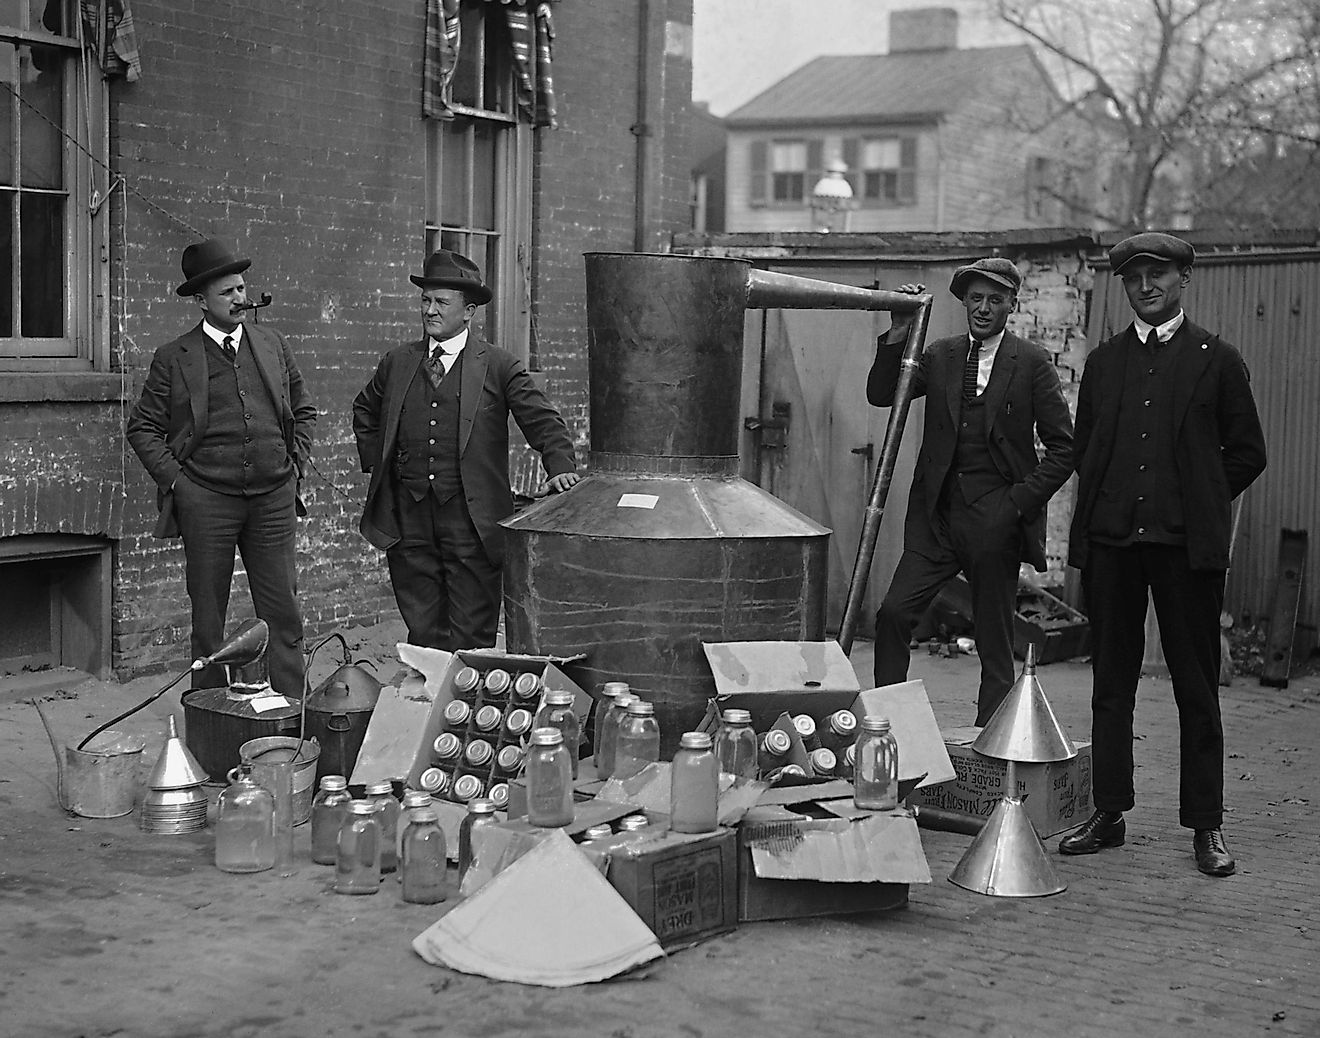 Prohibition agents stand with a still and mason jars used to distill hard liquor in Wash. D.C. area. Nov. 11, 1922. Credit: Everett Historical / Shutterstock.com